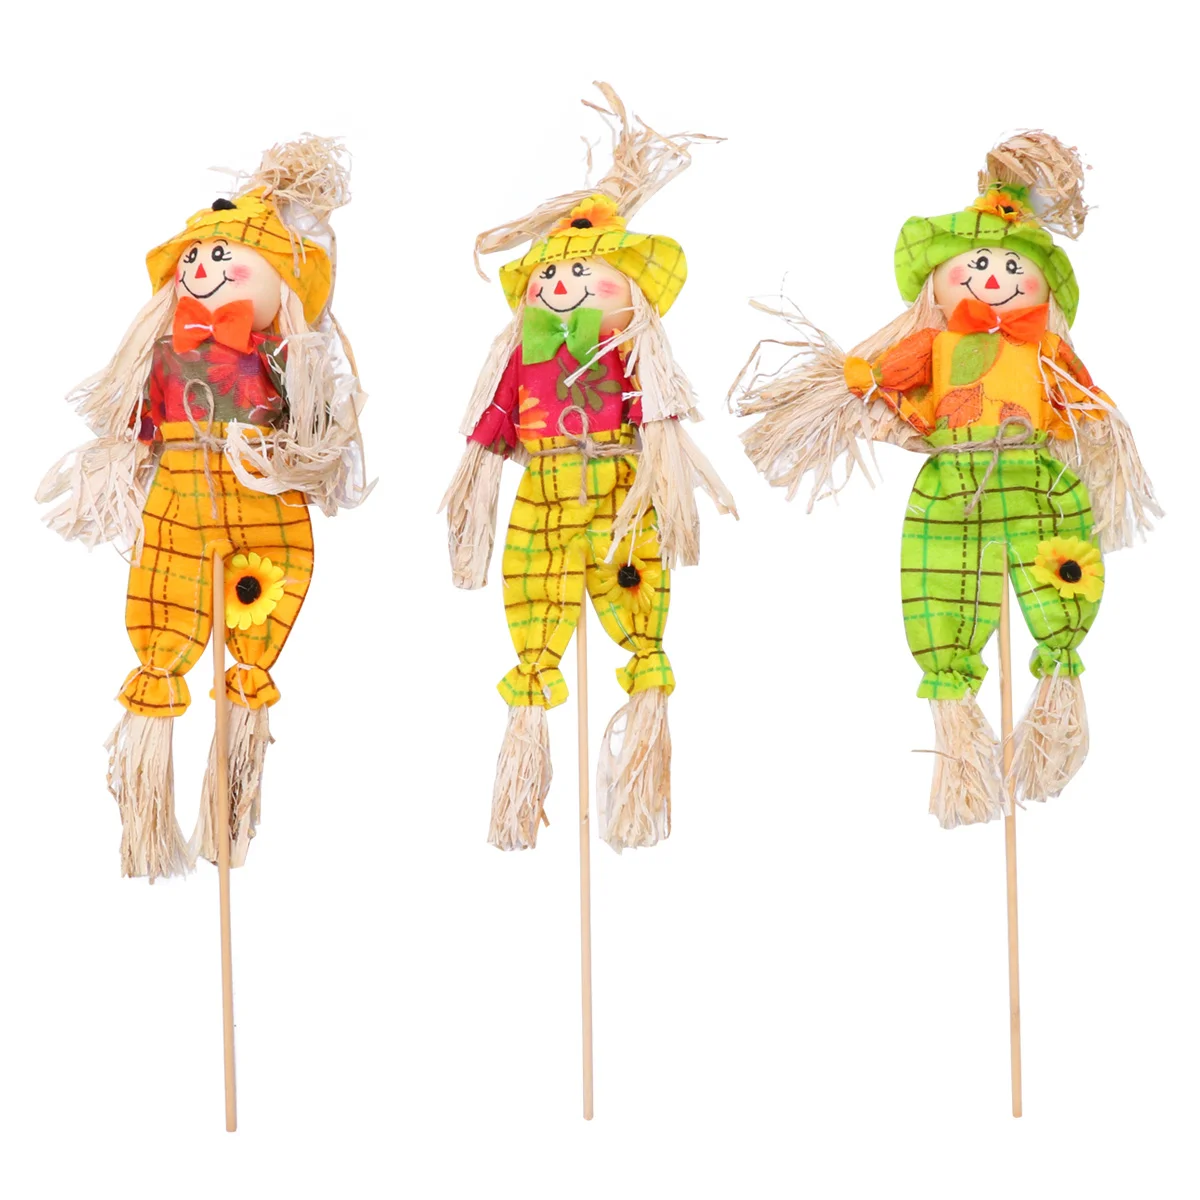 

3 Pcs Decor Halloween Scarecrow Outside Outdoor Decorations Home Ornaments Straw Classroom Layout Supplies Office